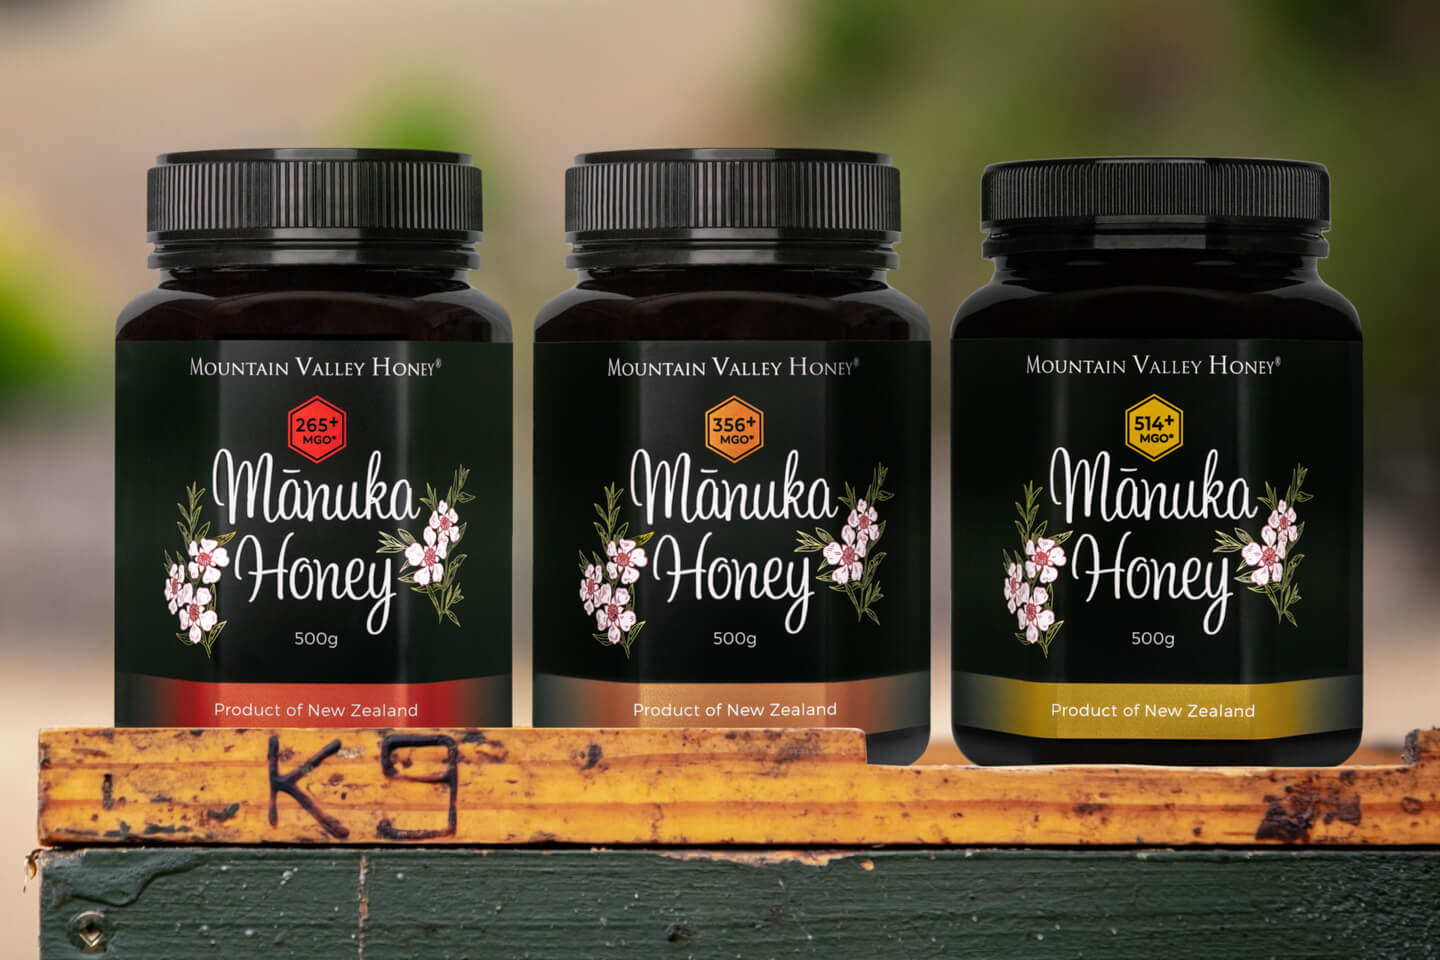 UMF vs MGO in Manuka honey. What’s the difference?